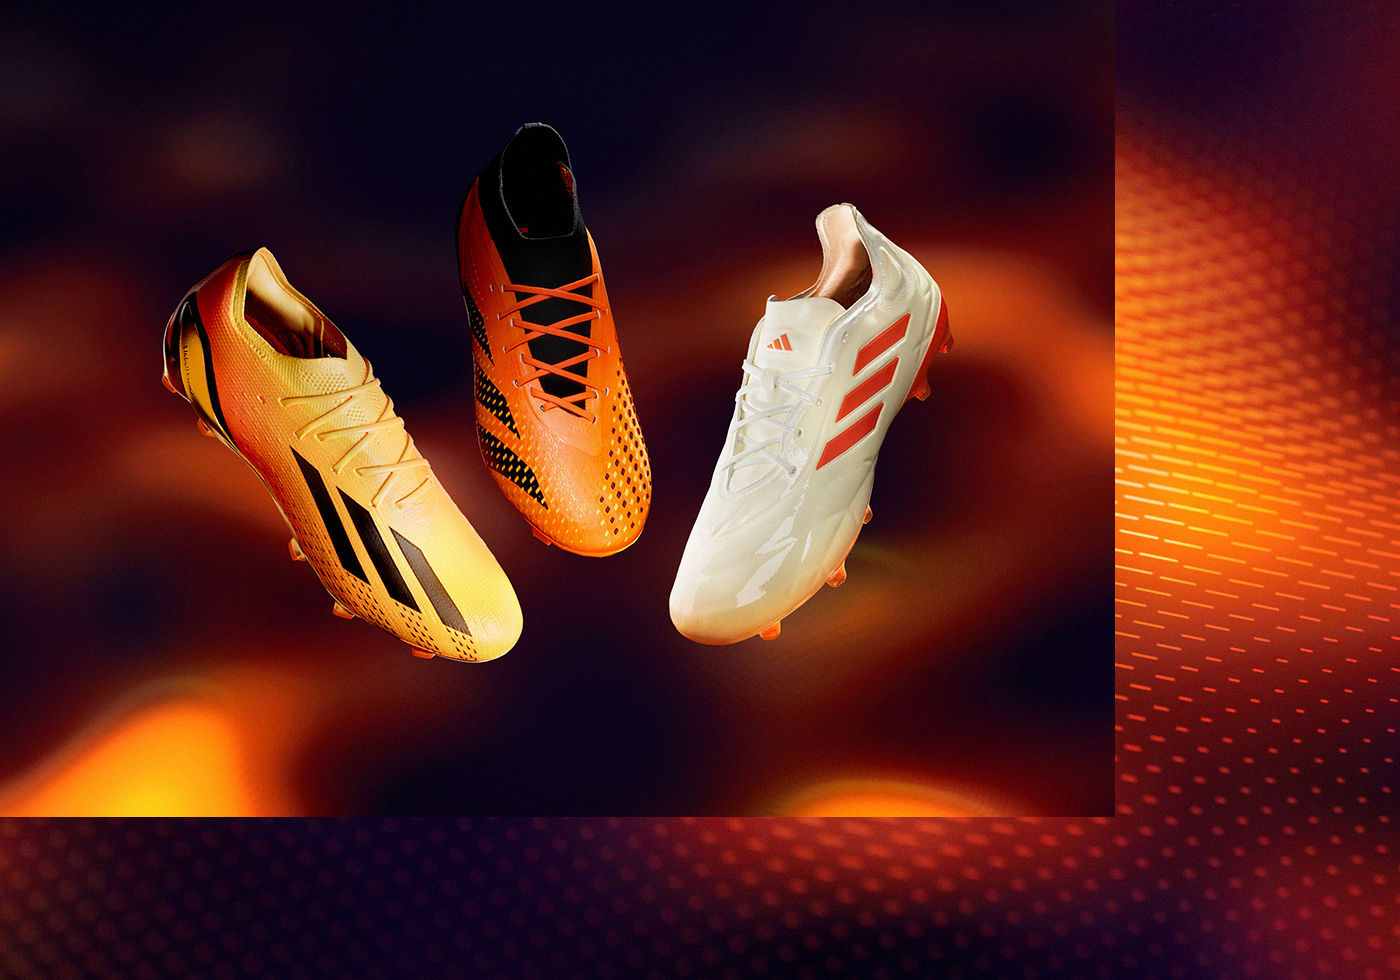 Three adidas football boots, Predator, Copa and X, touch the ground. It looks like a heatmap in hues of orange and red